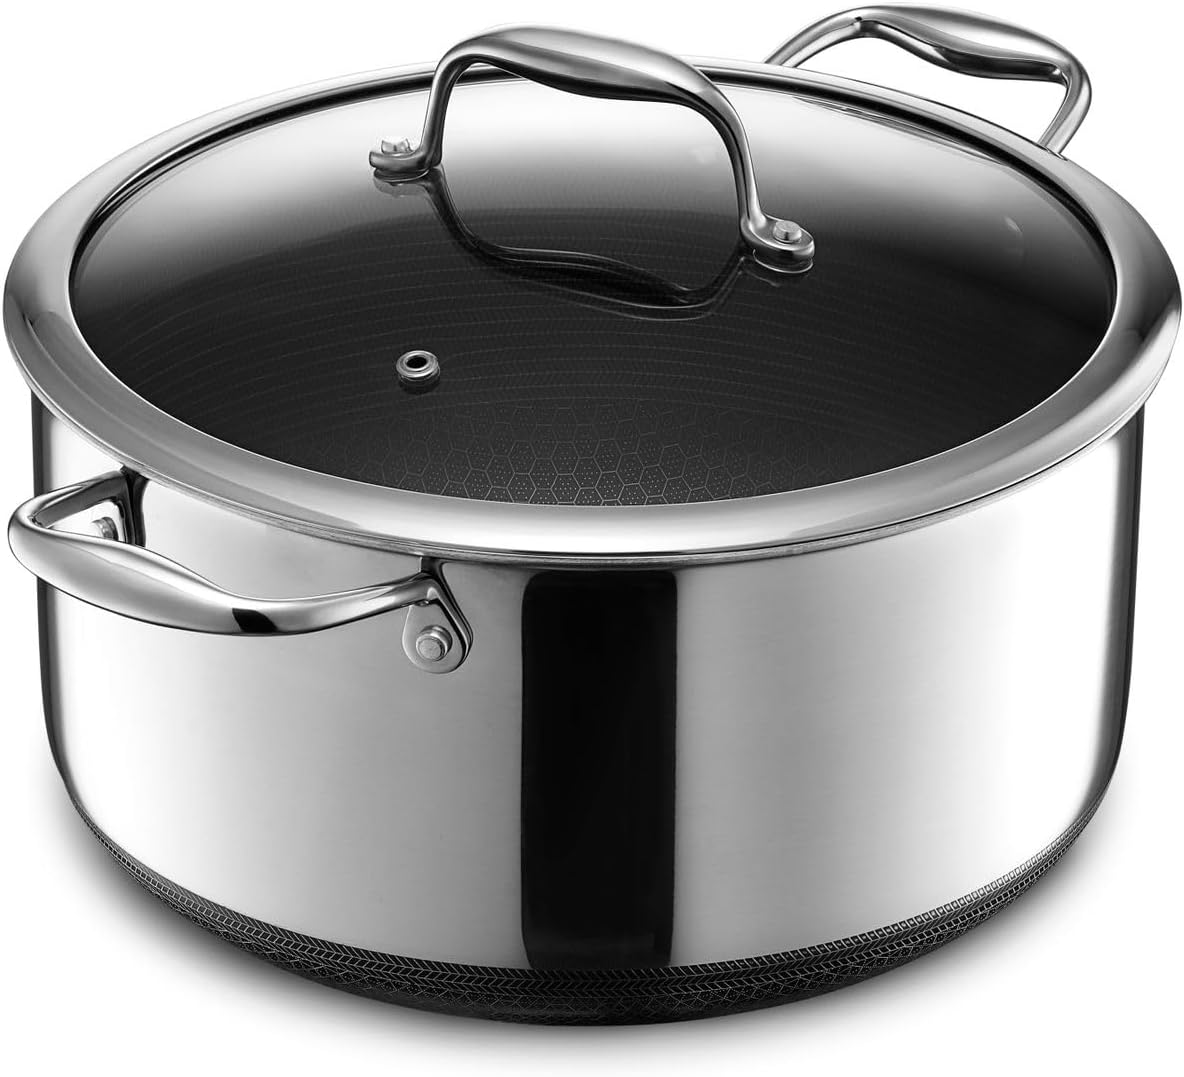 https://bigbigmart.com/wp-content/uploads/2023/12/HexClad-Hybrid-Nonstick-8-Quart-Stockpot-with-Tempered-Glass-Lid-Dishwasher-Safe-Induction-Ready-Compatible-with-All-Cooktops.jpg